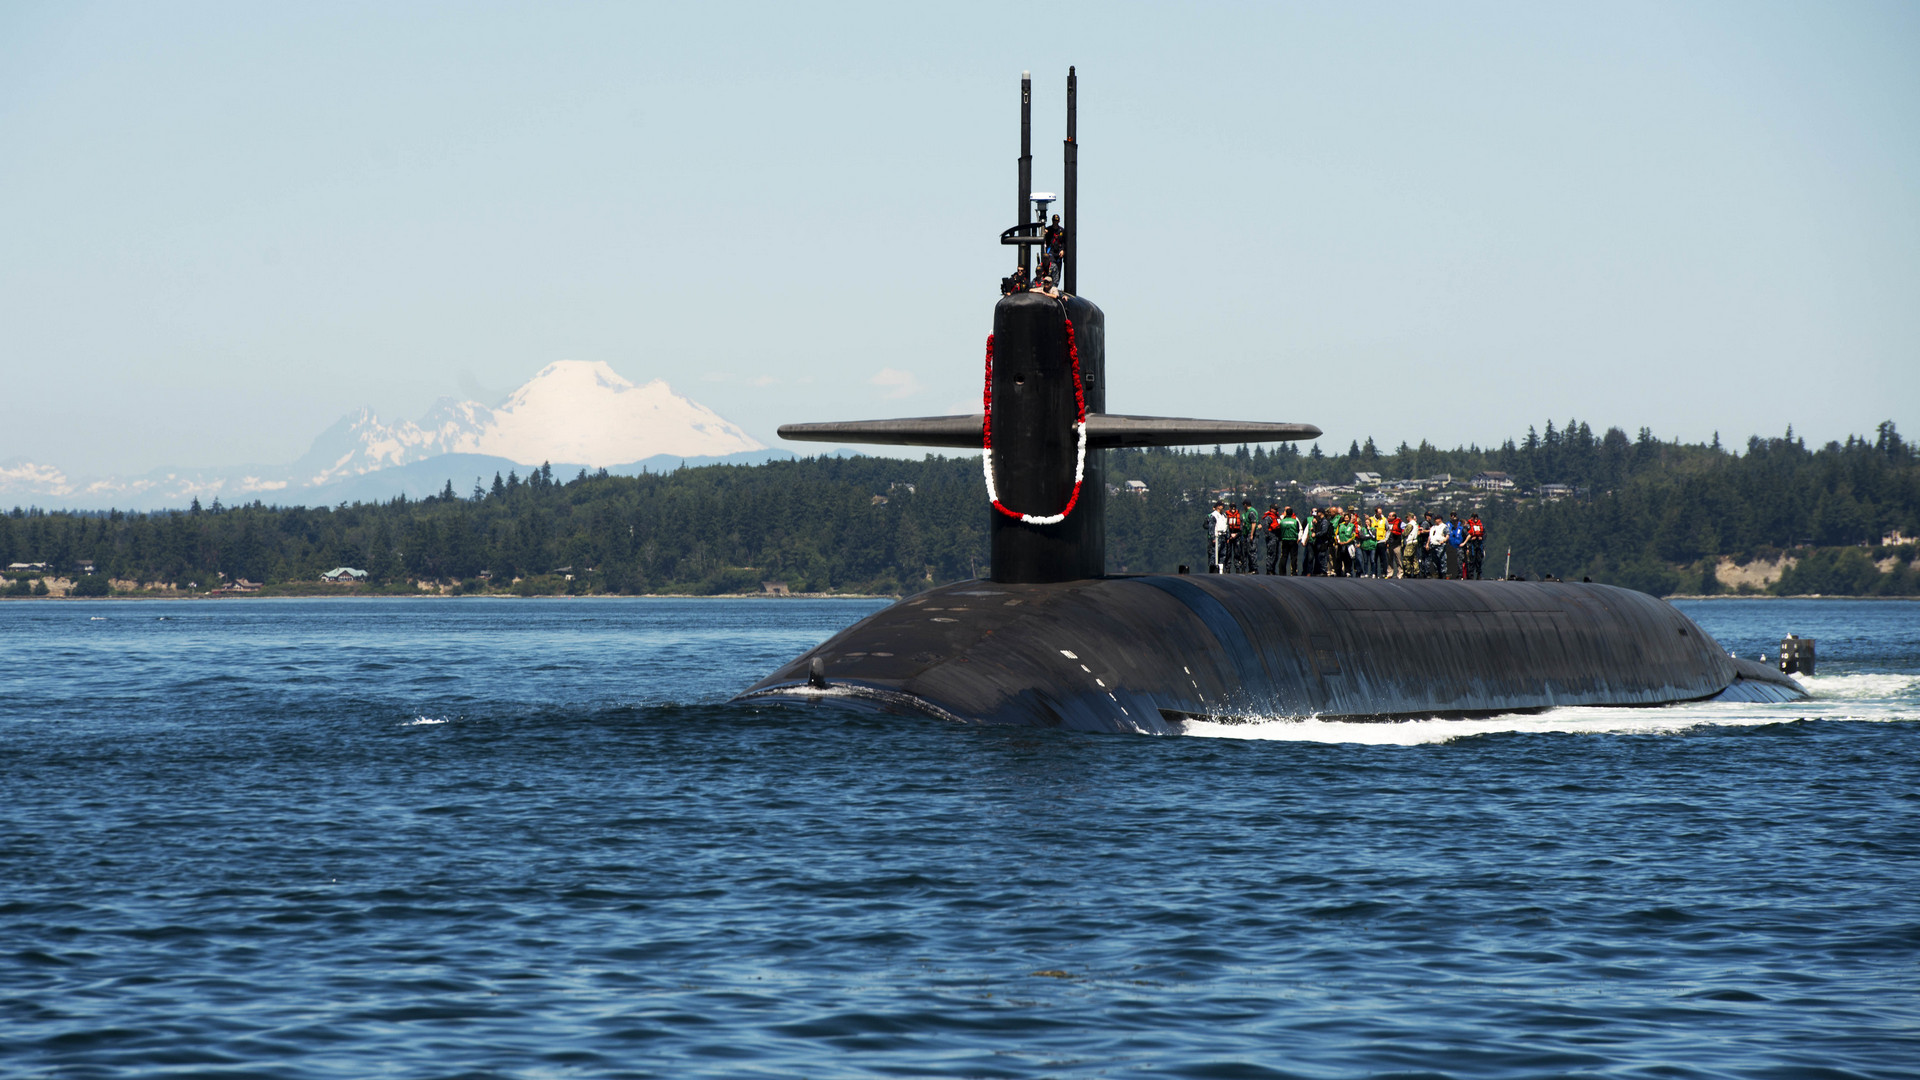 Puget Sound, Wash. (July 12, 2018) The Ohio-class ballistic missile submarine USS Nebraska (SSBN 739) transits the Hood Canal as it returns home to Naval Base Kitsap-Bangor following the boat's first strategic patrol since 2013. Nebraska recently completed a 41-month engineered refueling overhaul, which will extend the life of the submarine for another 20 years. (U.S. Navy photo by Mass Communication Specialist 1st Class Amanda R. Gray.